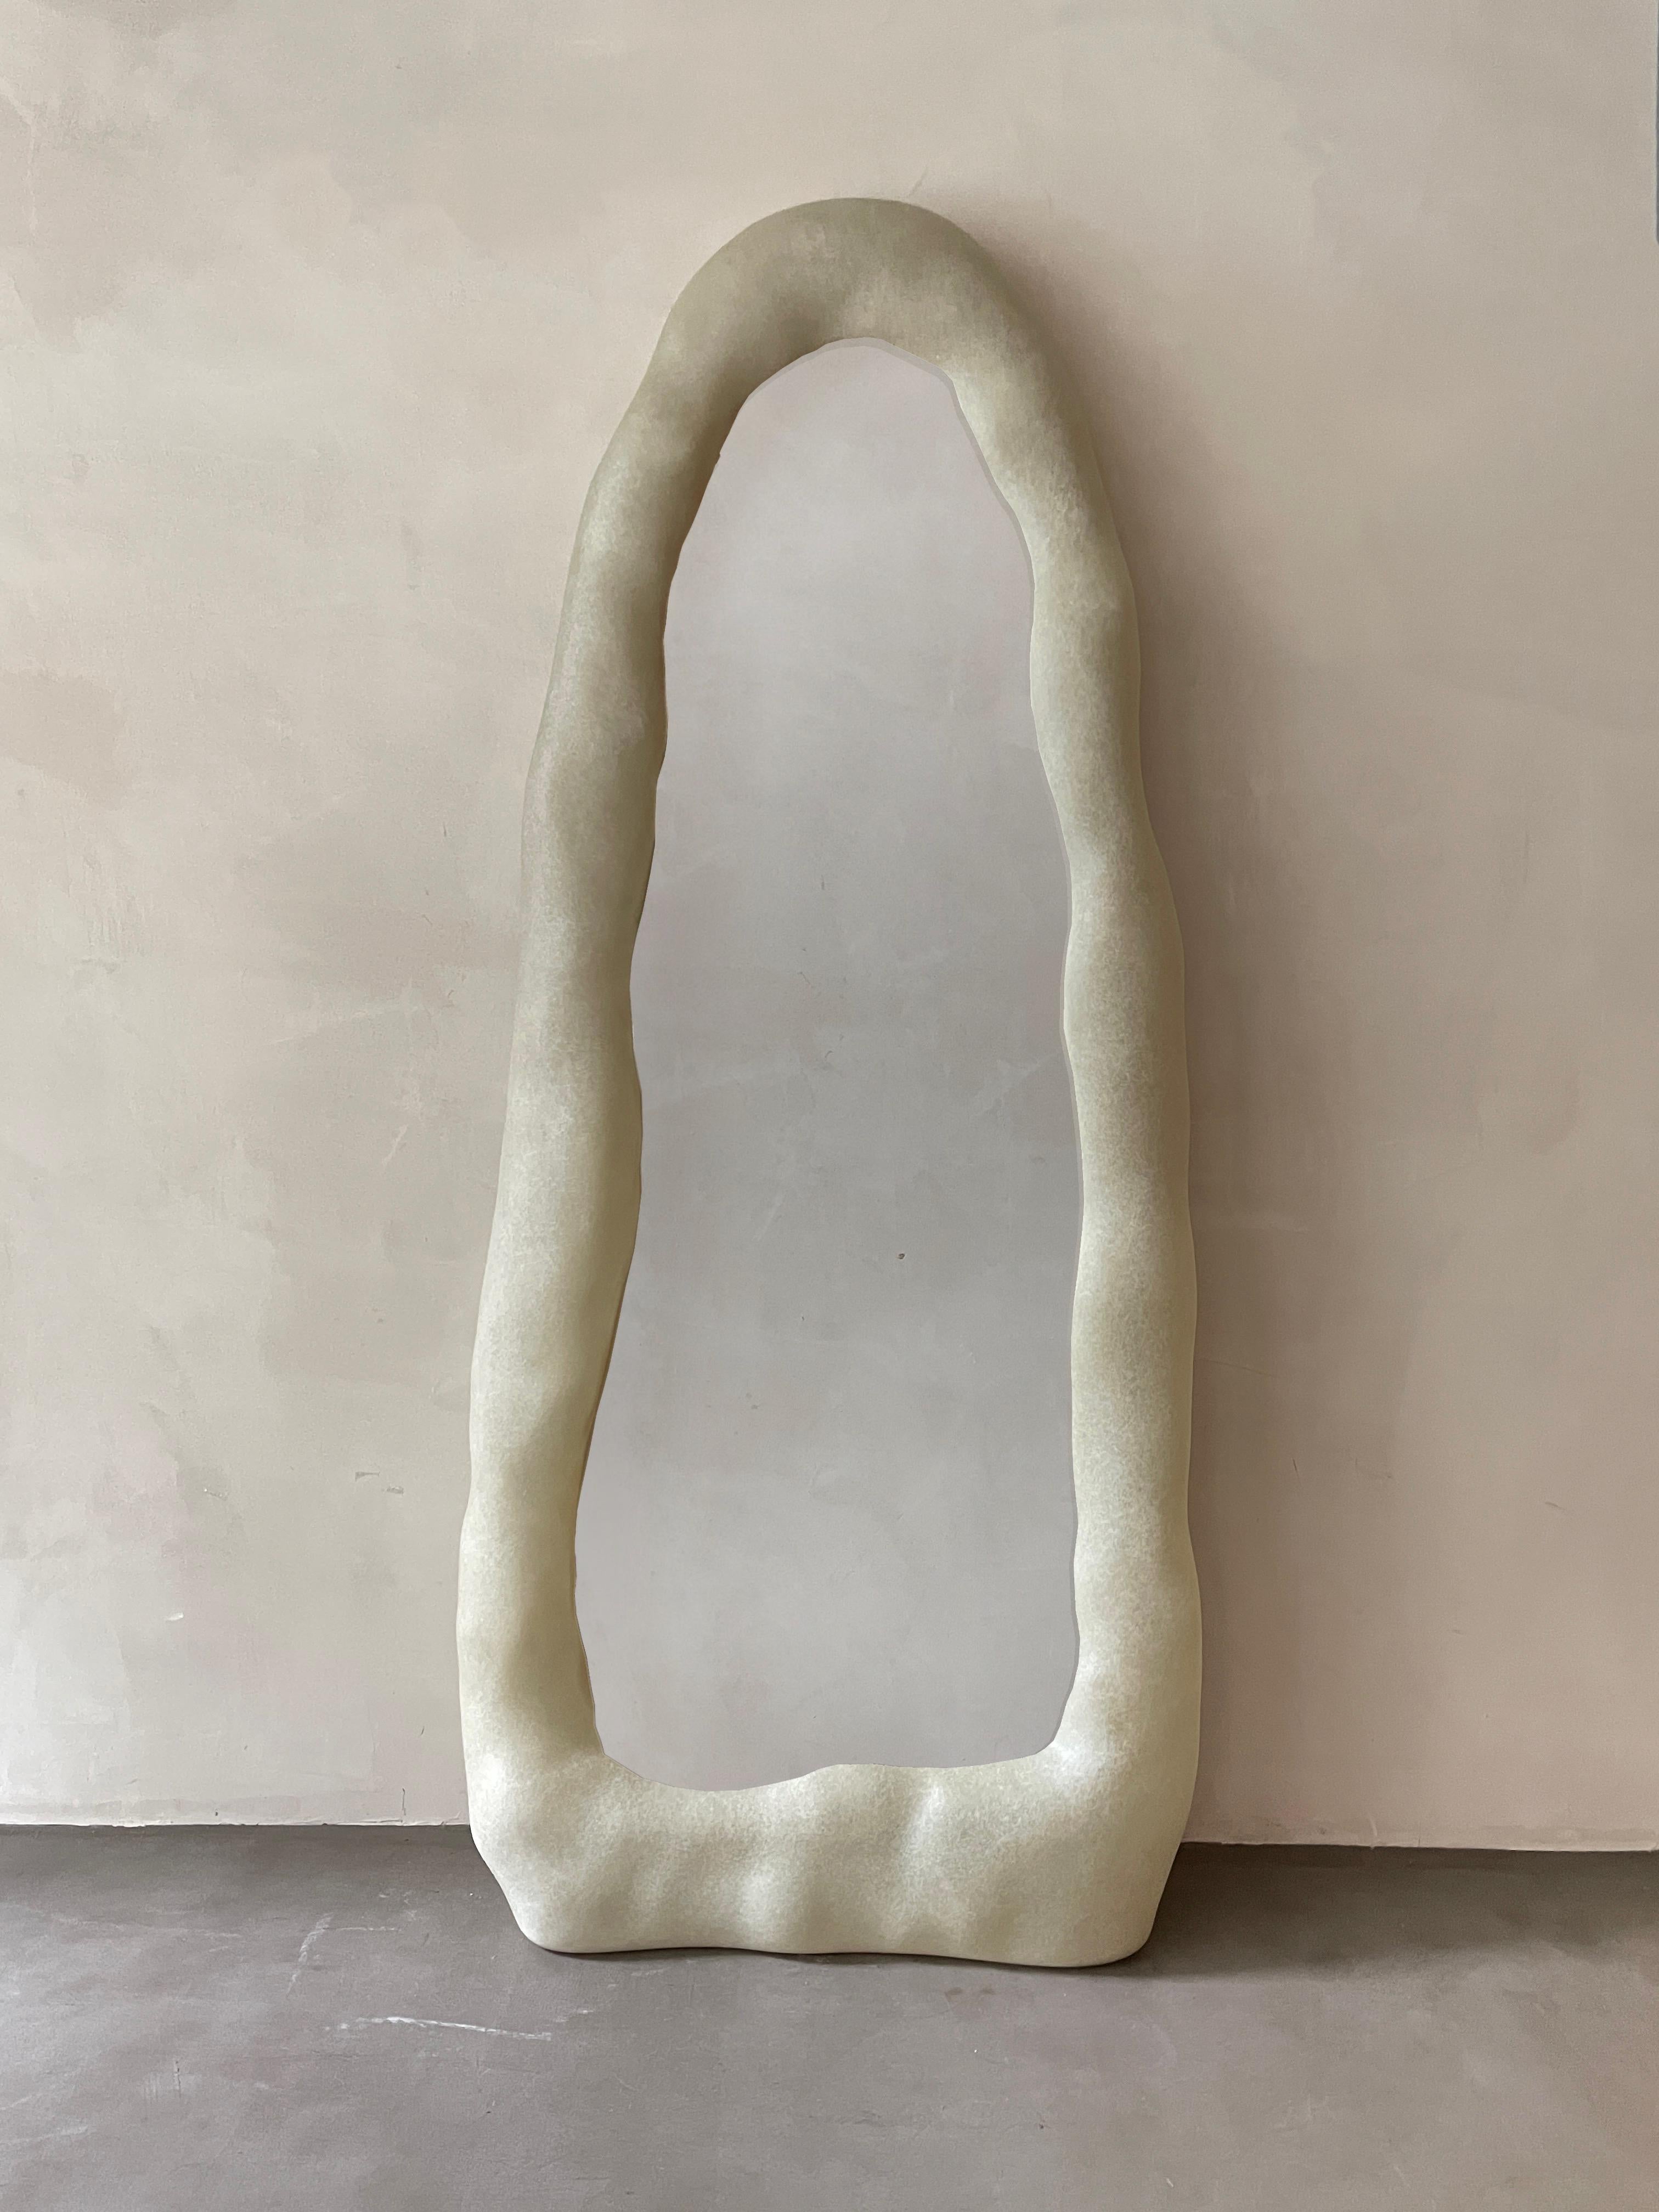 Knead mirror by Karstudio
Materials: Fiberglass
Dimensions: W 80 x D 22 x H 193 cm

Knead mirror preserves the handmade traces of clay-kneading, and the hand-polished
texture captures the aesthetic and emotion of creation. The mirror is